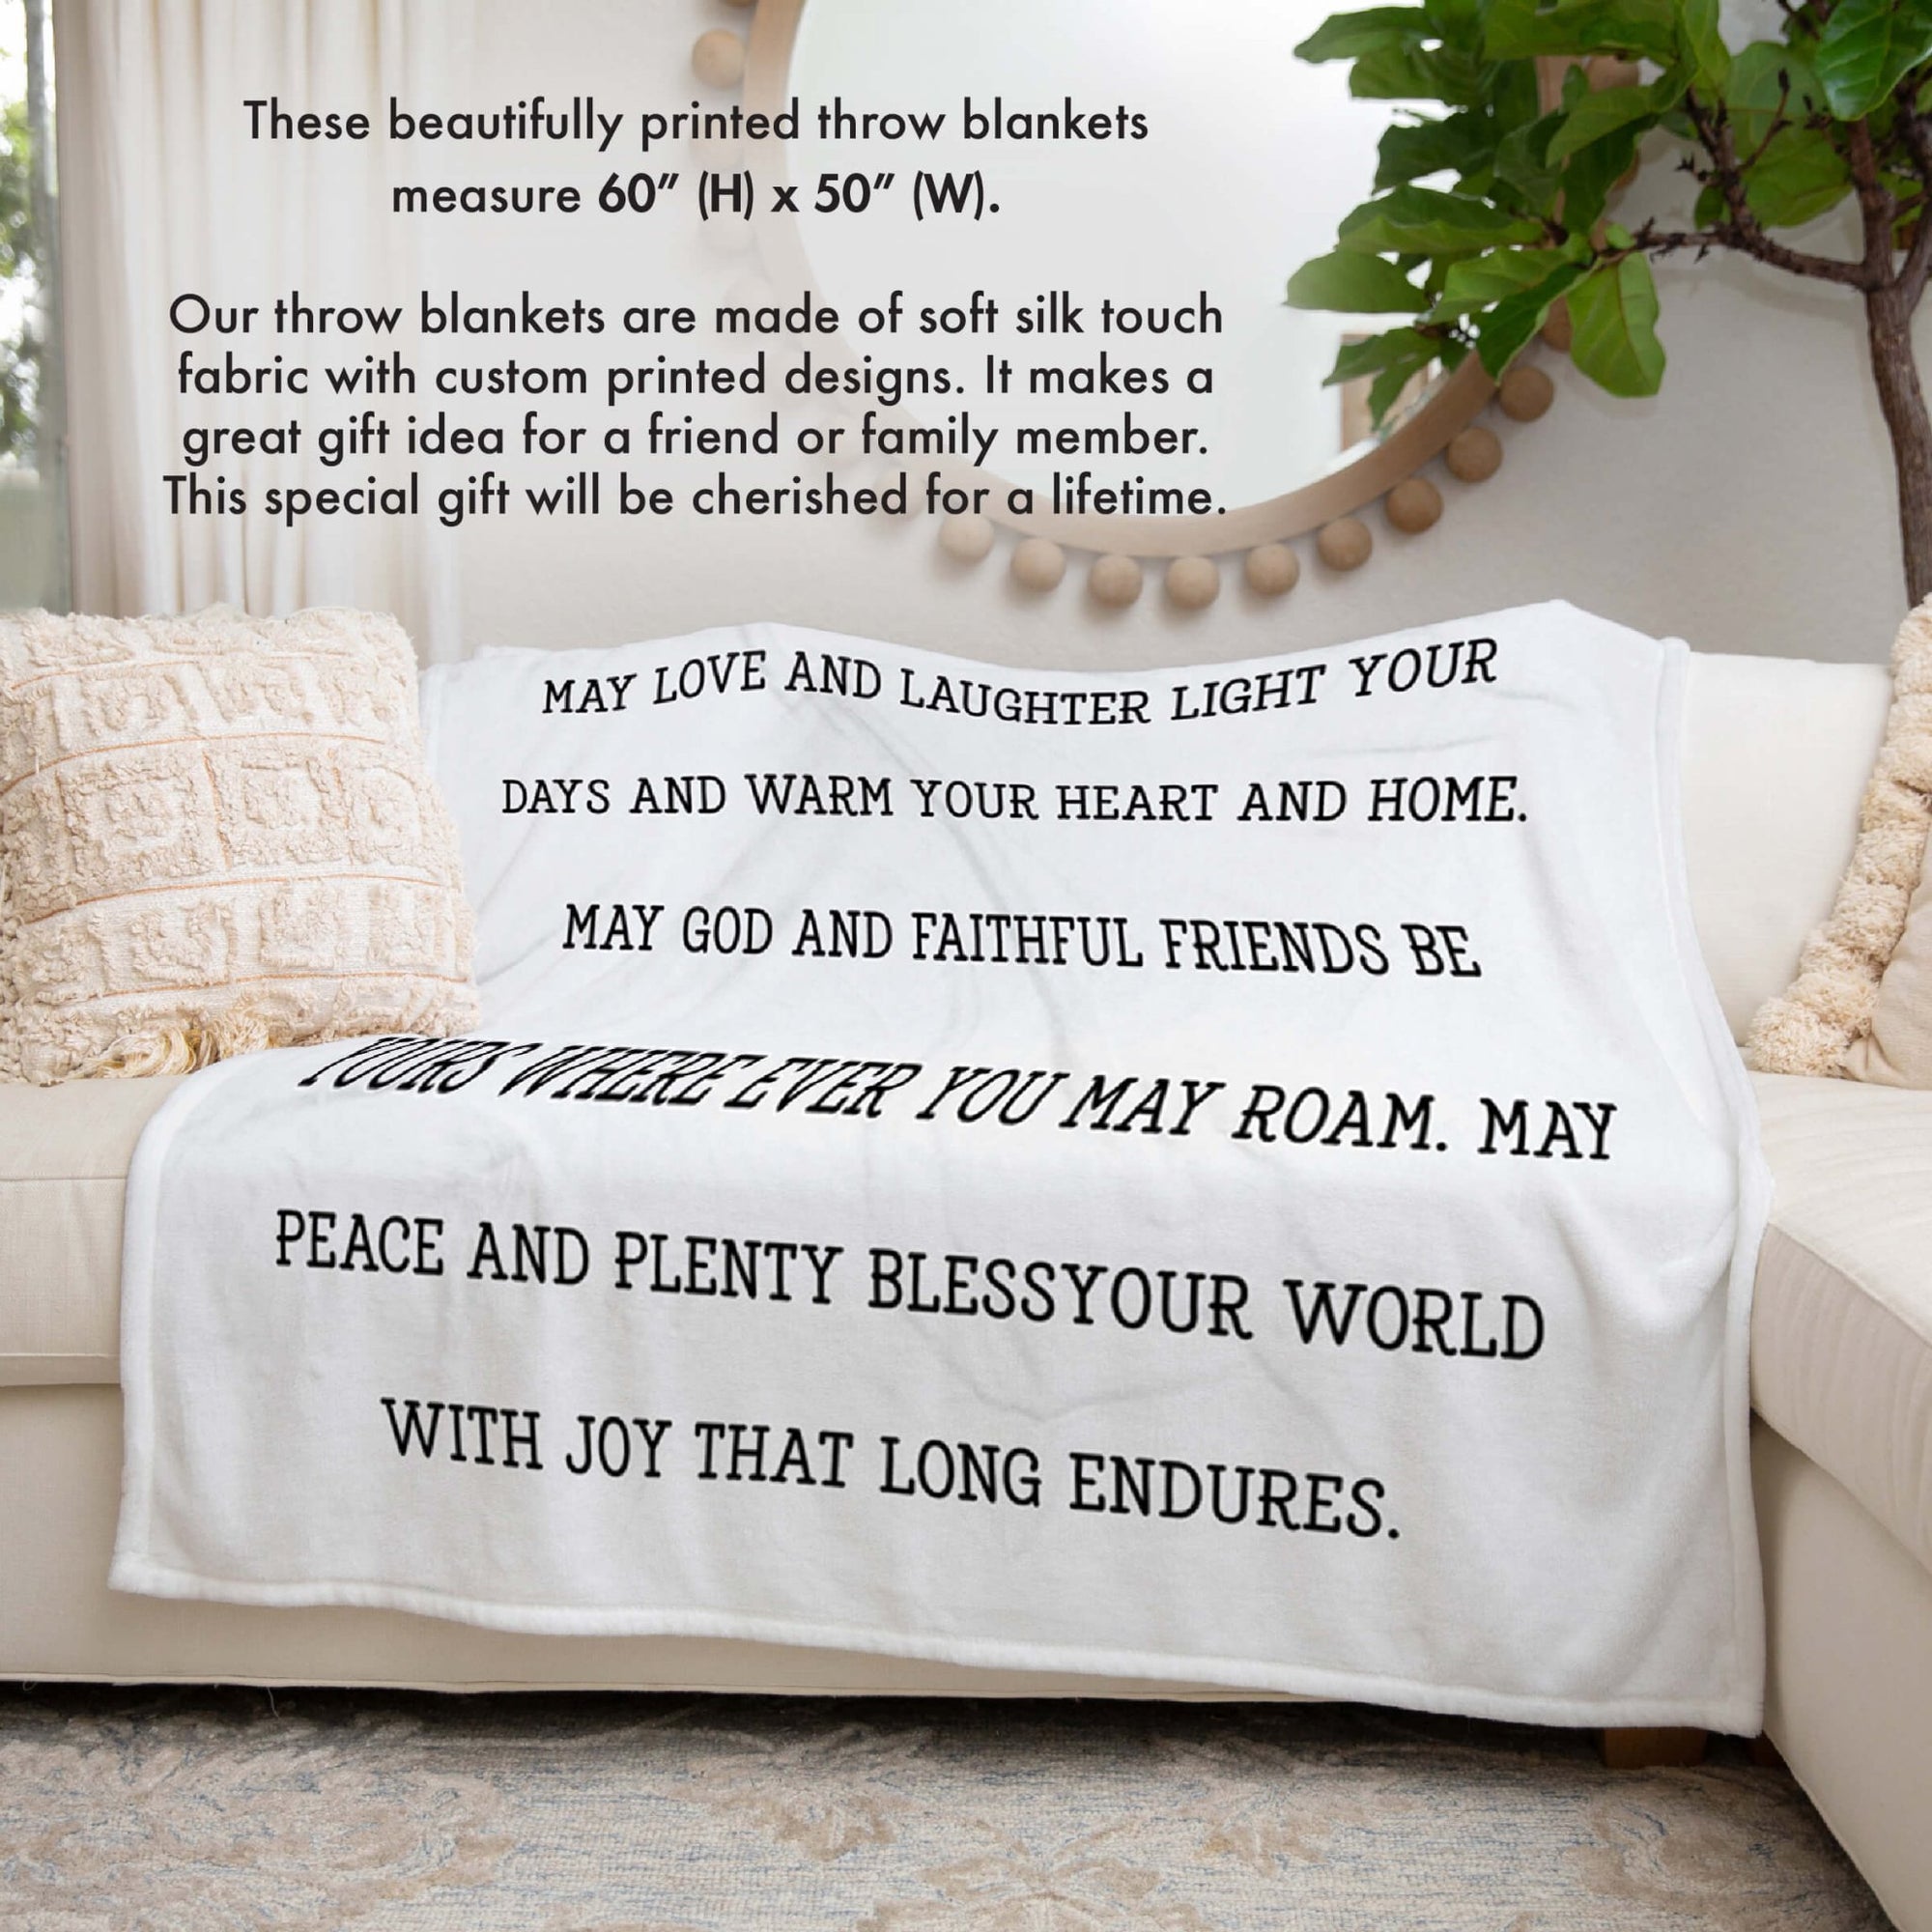 St. Patrick's Day Inspirational Soft And Lightweight Throw Blankets For Home Decor - Old Irish Blessings - LifeSong Milestones